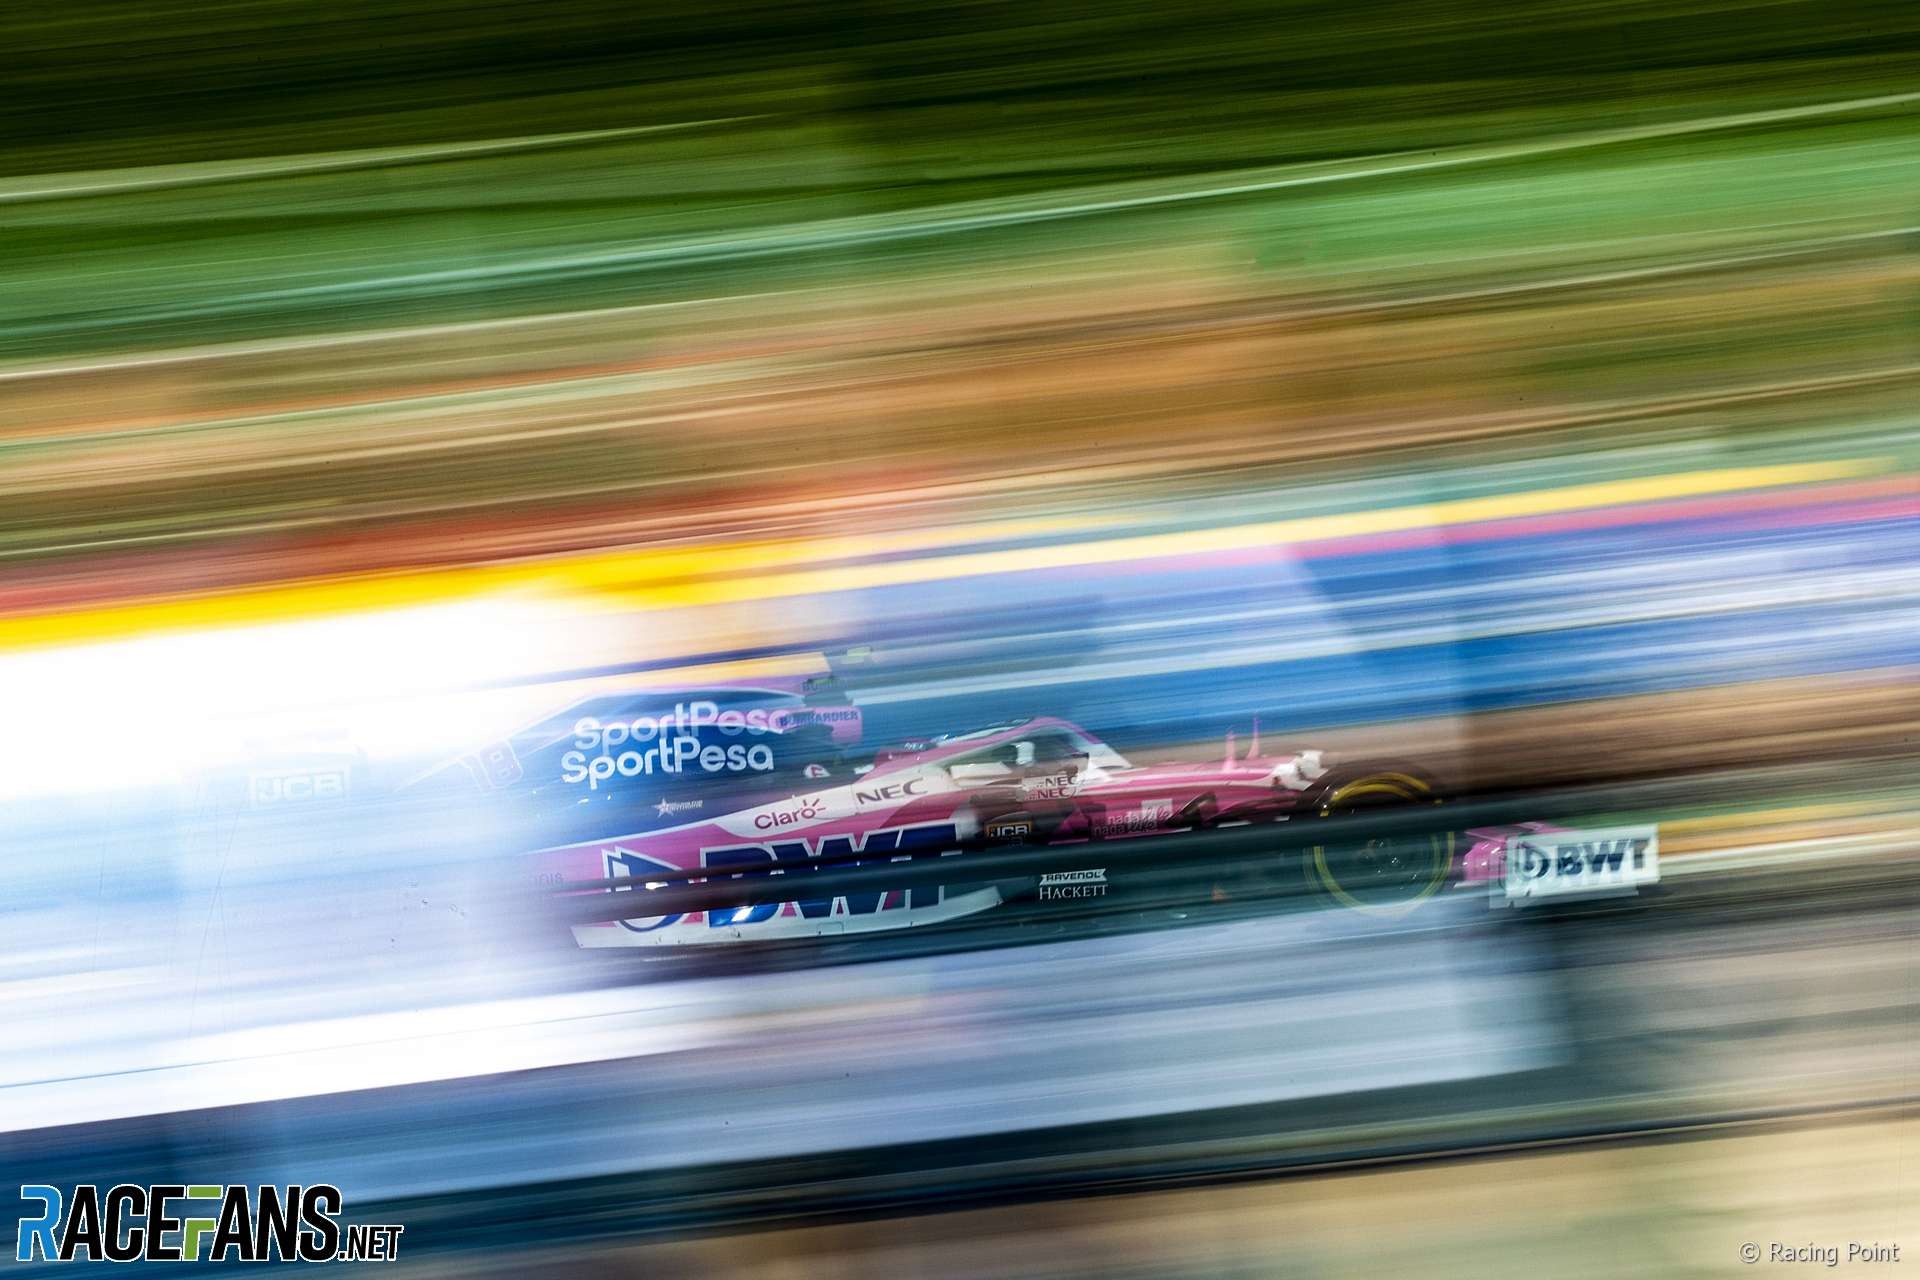 Lance Stroll, Racing Point, Spa-Francorchamps, 2019